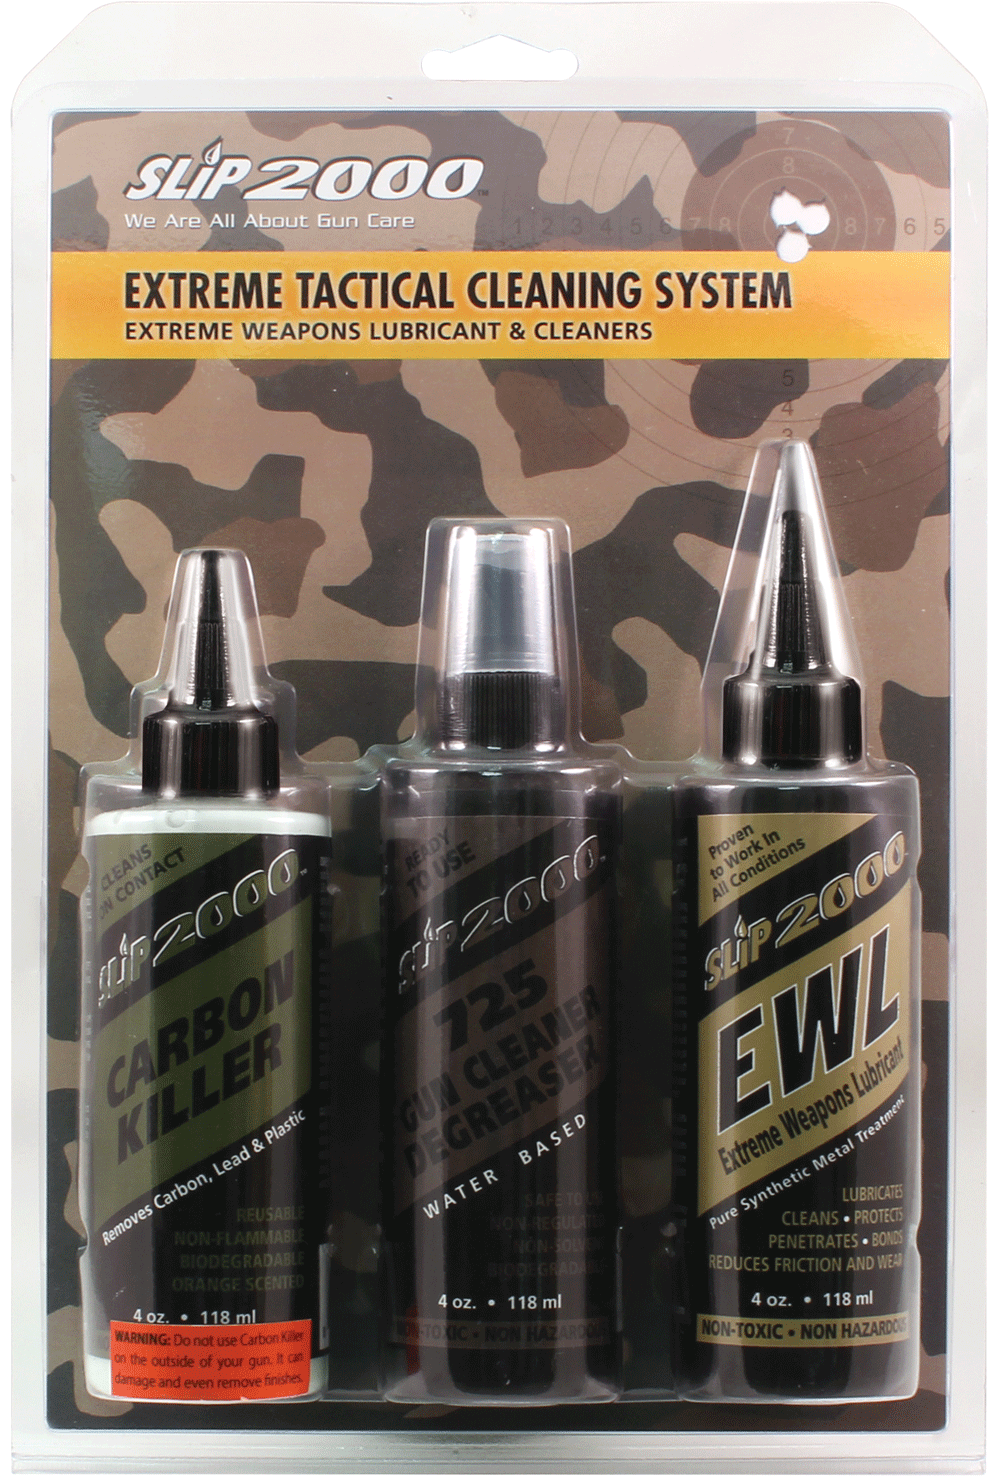 SLIP 2000 (SPS MARKETING) Slip 2000 (sps Marketing) Extreme Tactical Cleaning System, Slip 60387       Ext Tactical System 4oz Gun Care